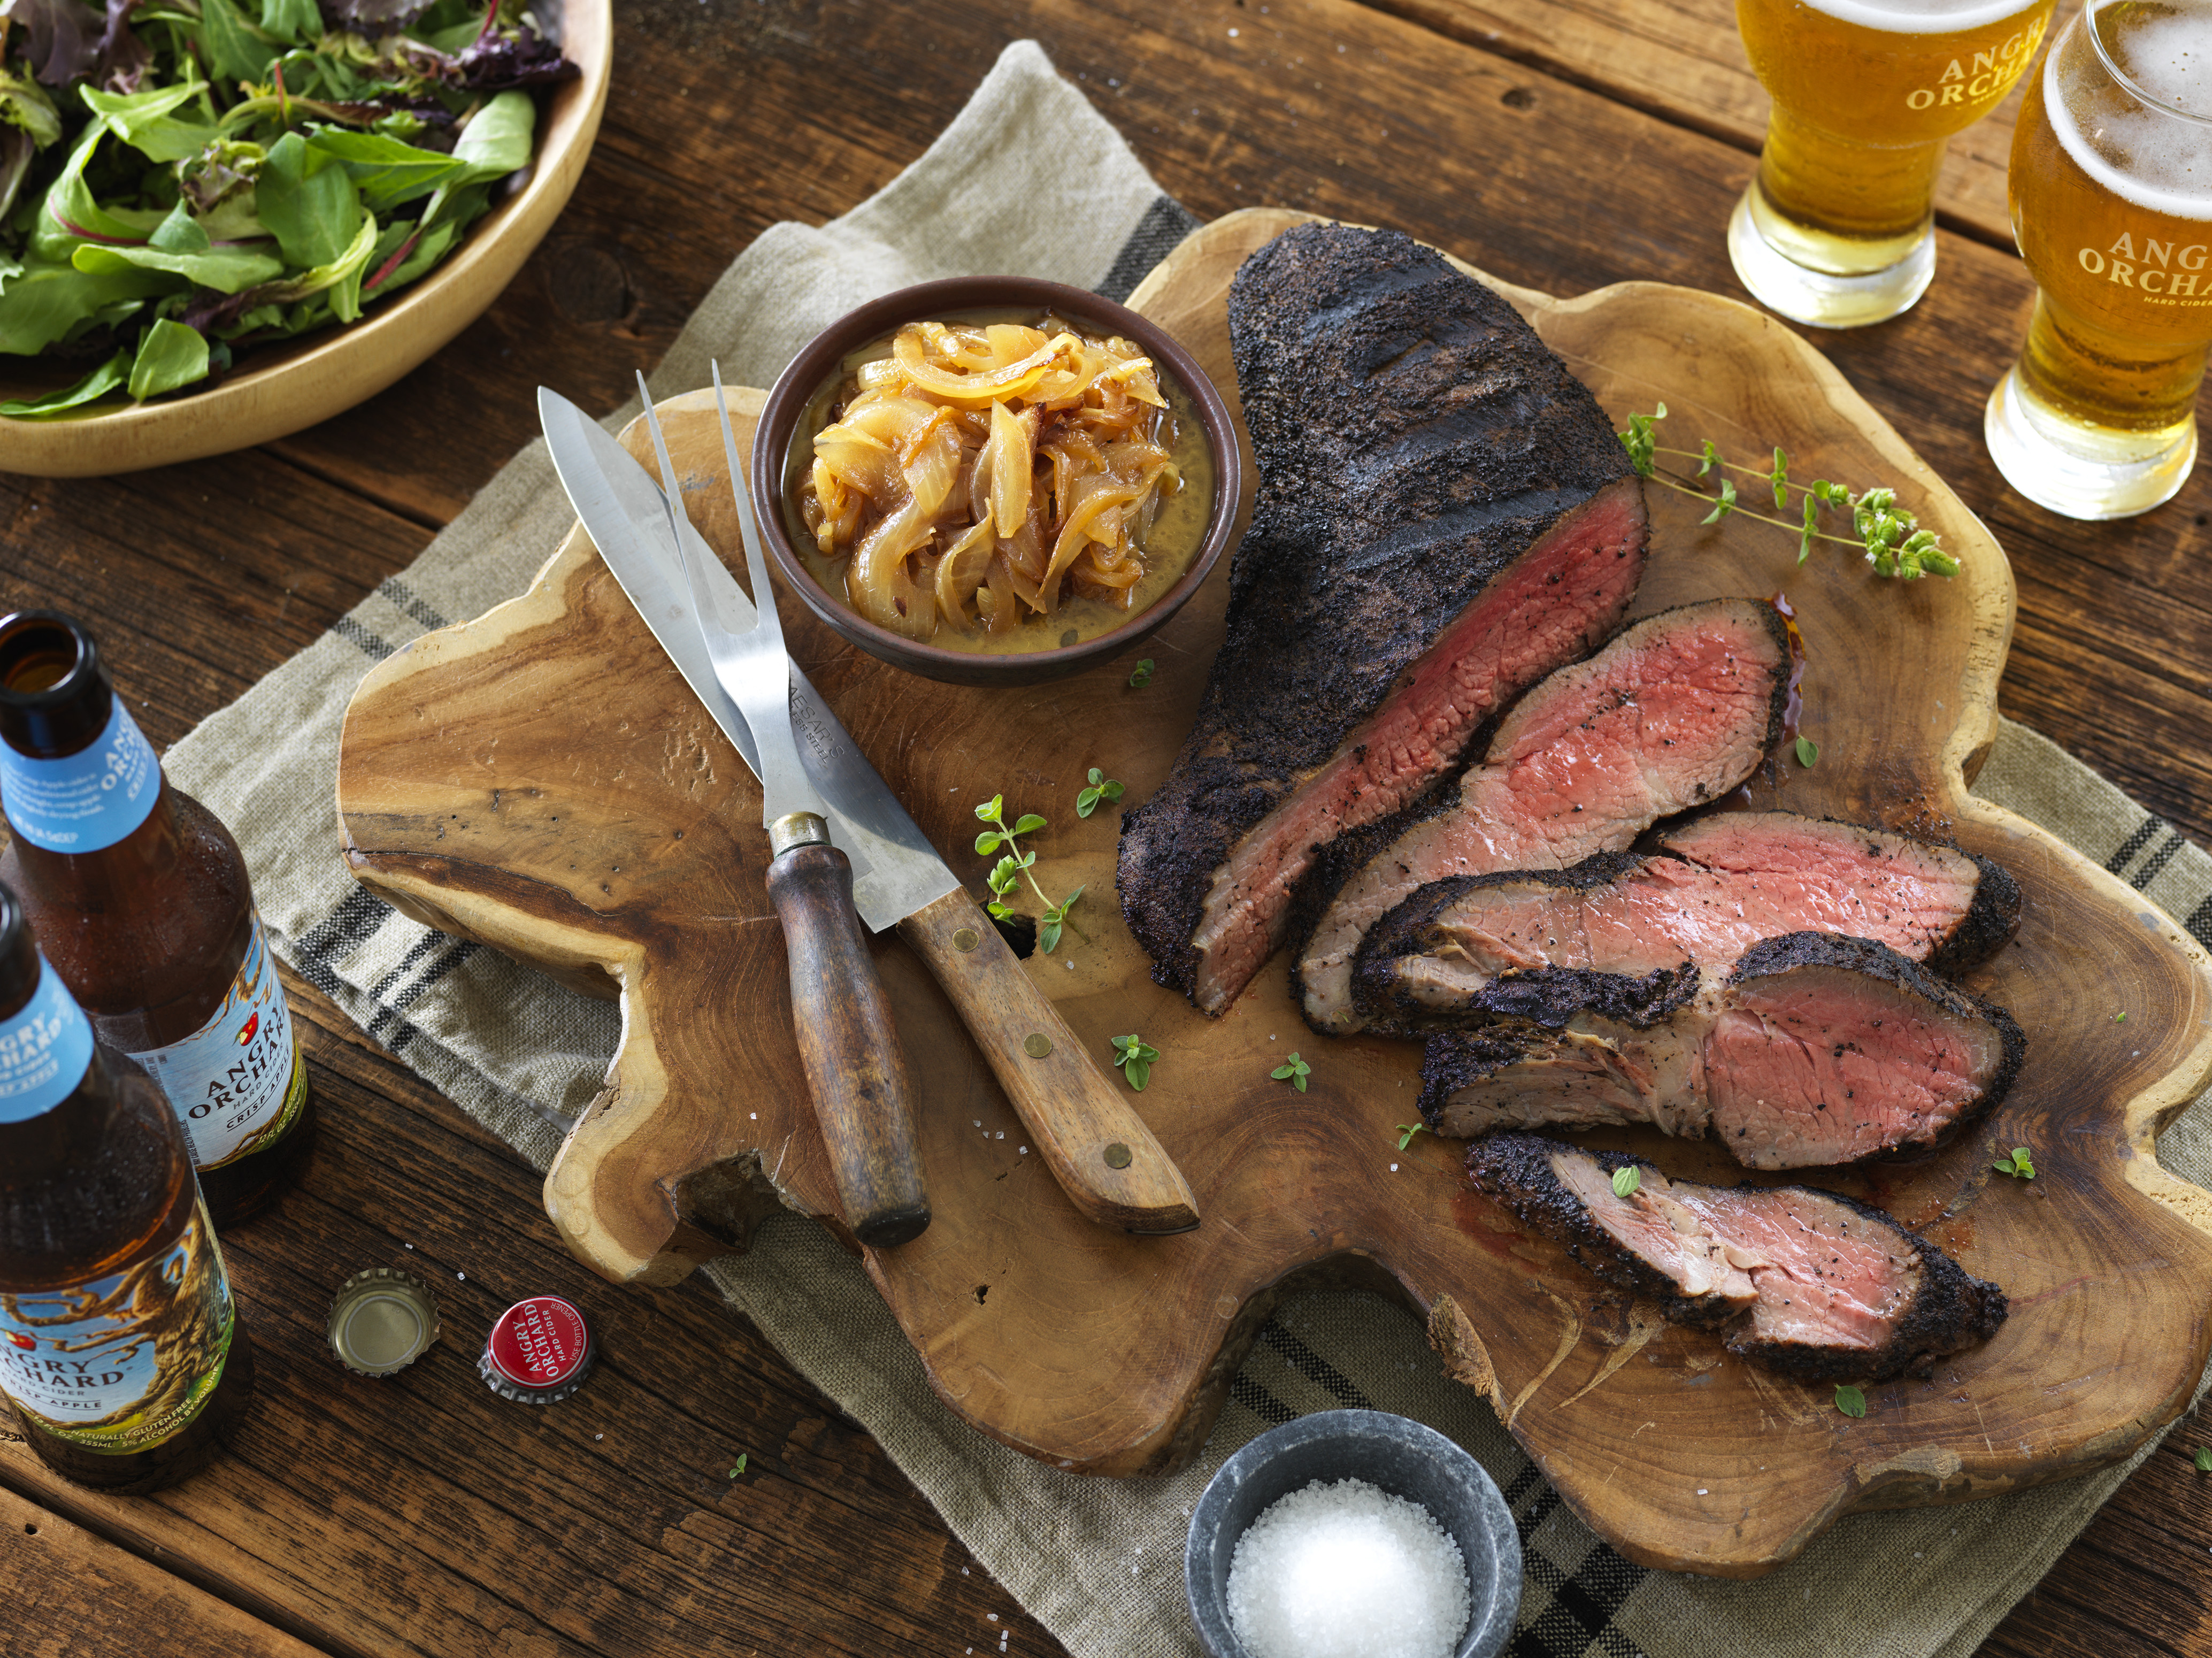 Angry Orchard’s – Spice Rubbed Tri-Tip Steak with Cider Onion Relish